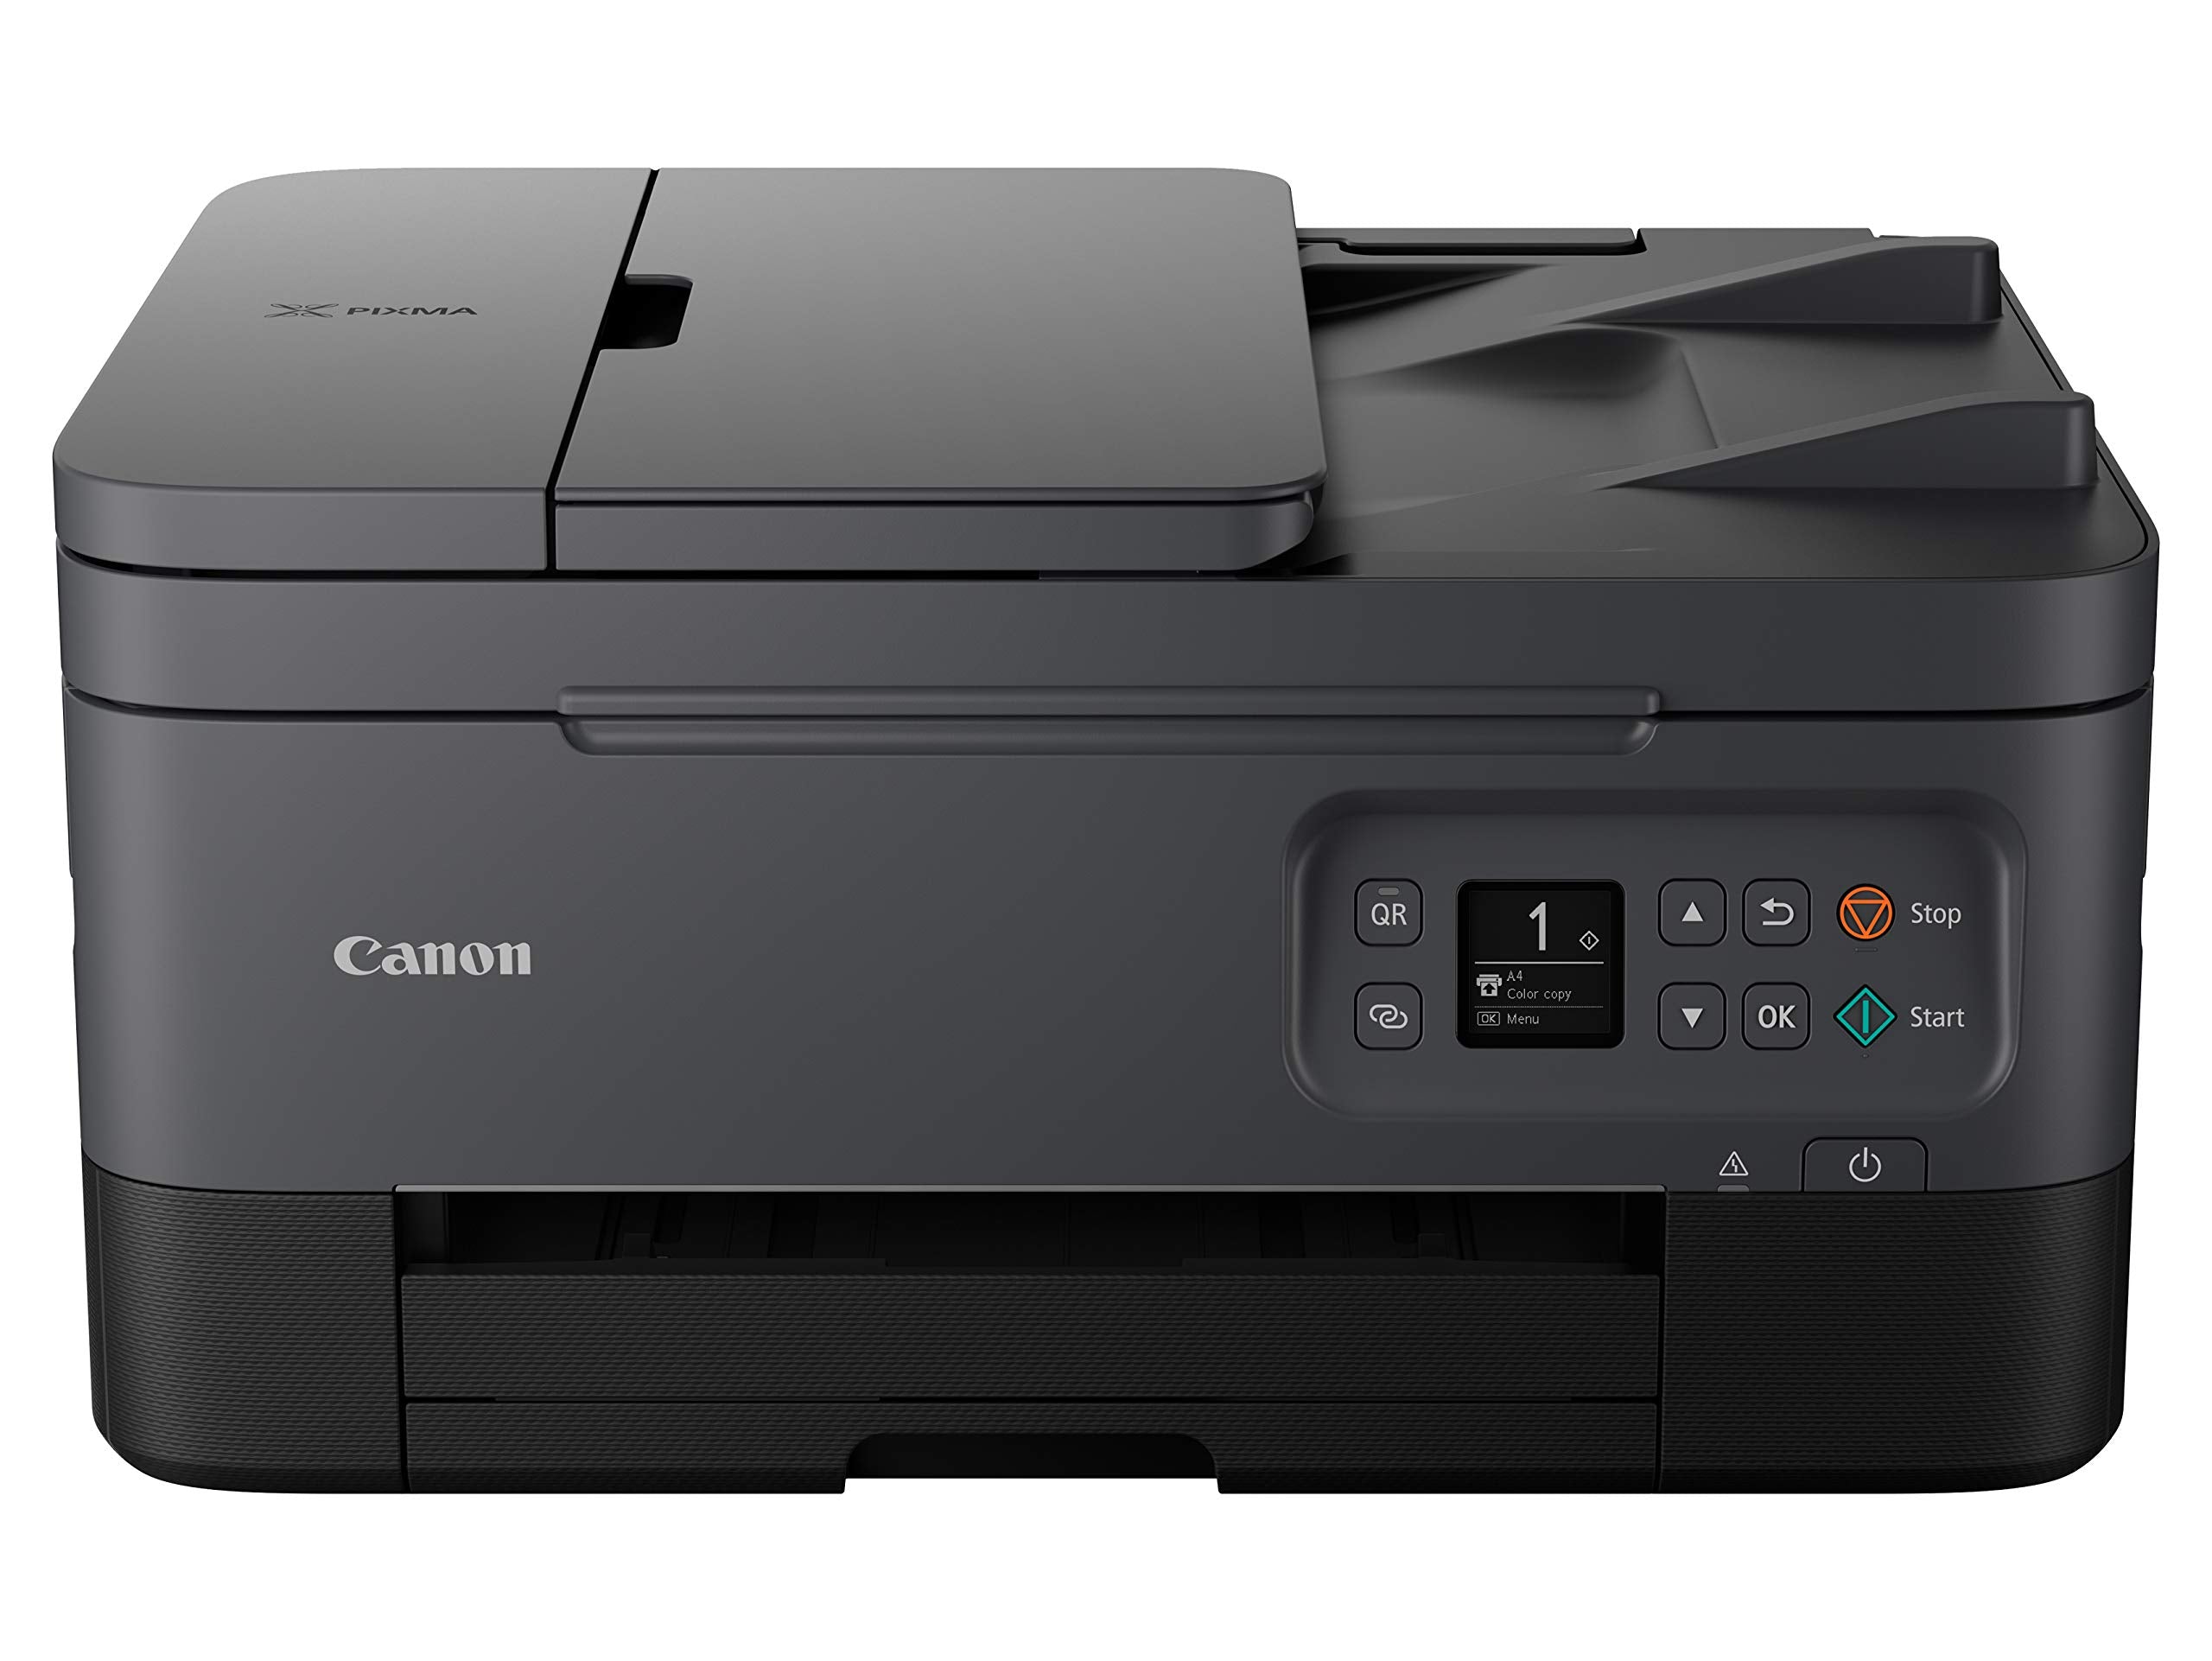 Canon TR7020 All-in-One Wireless Printer for Home Use,Black, Compact (4460C002)  - Acceptable